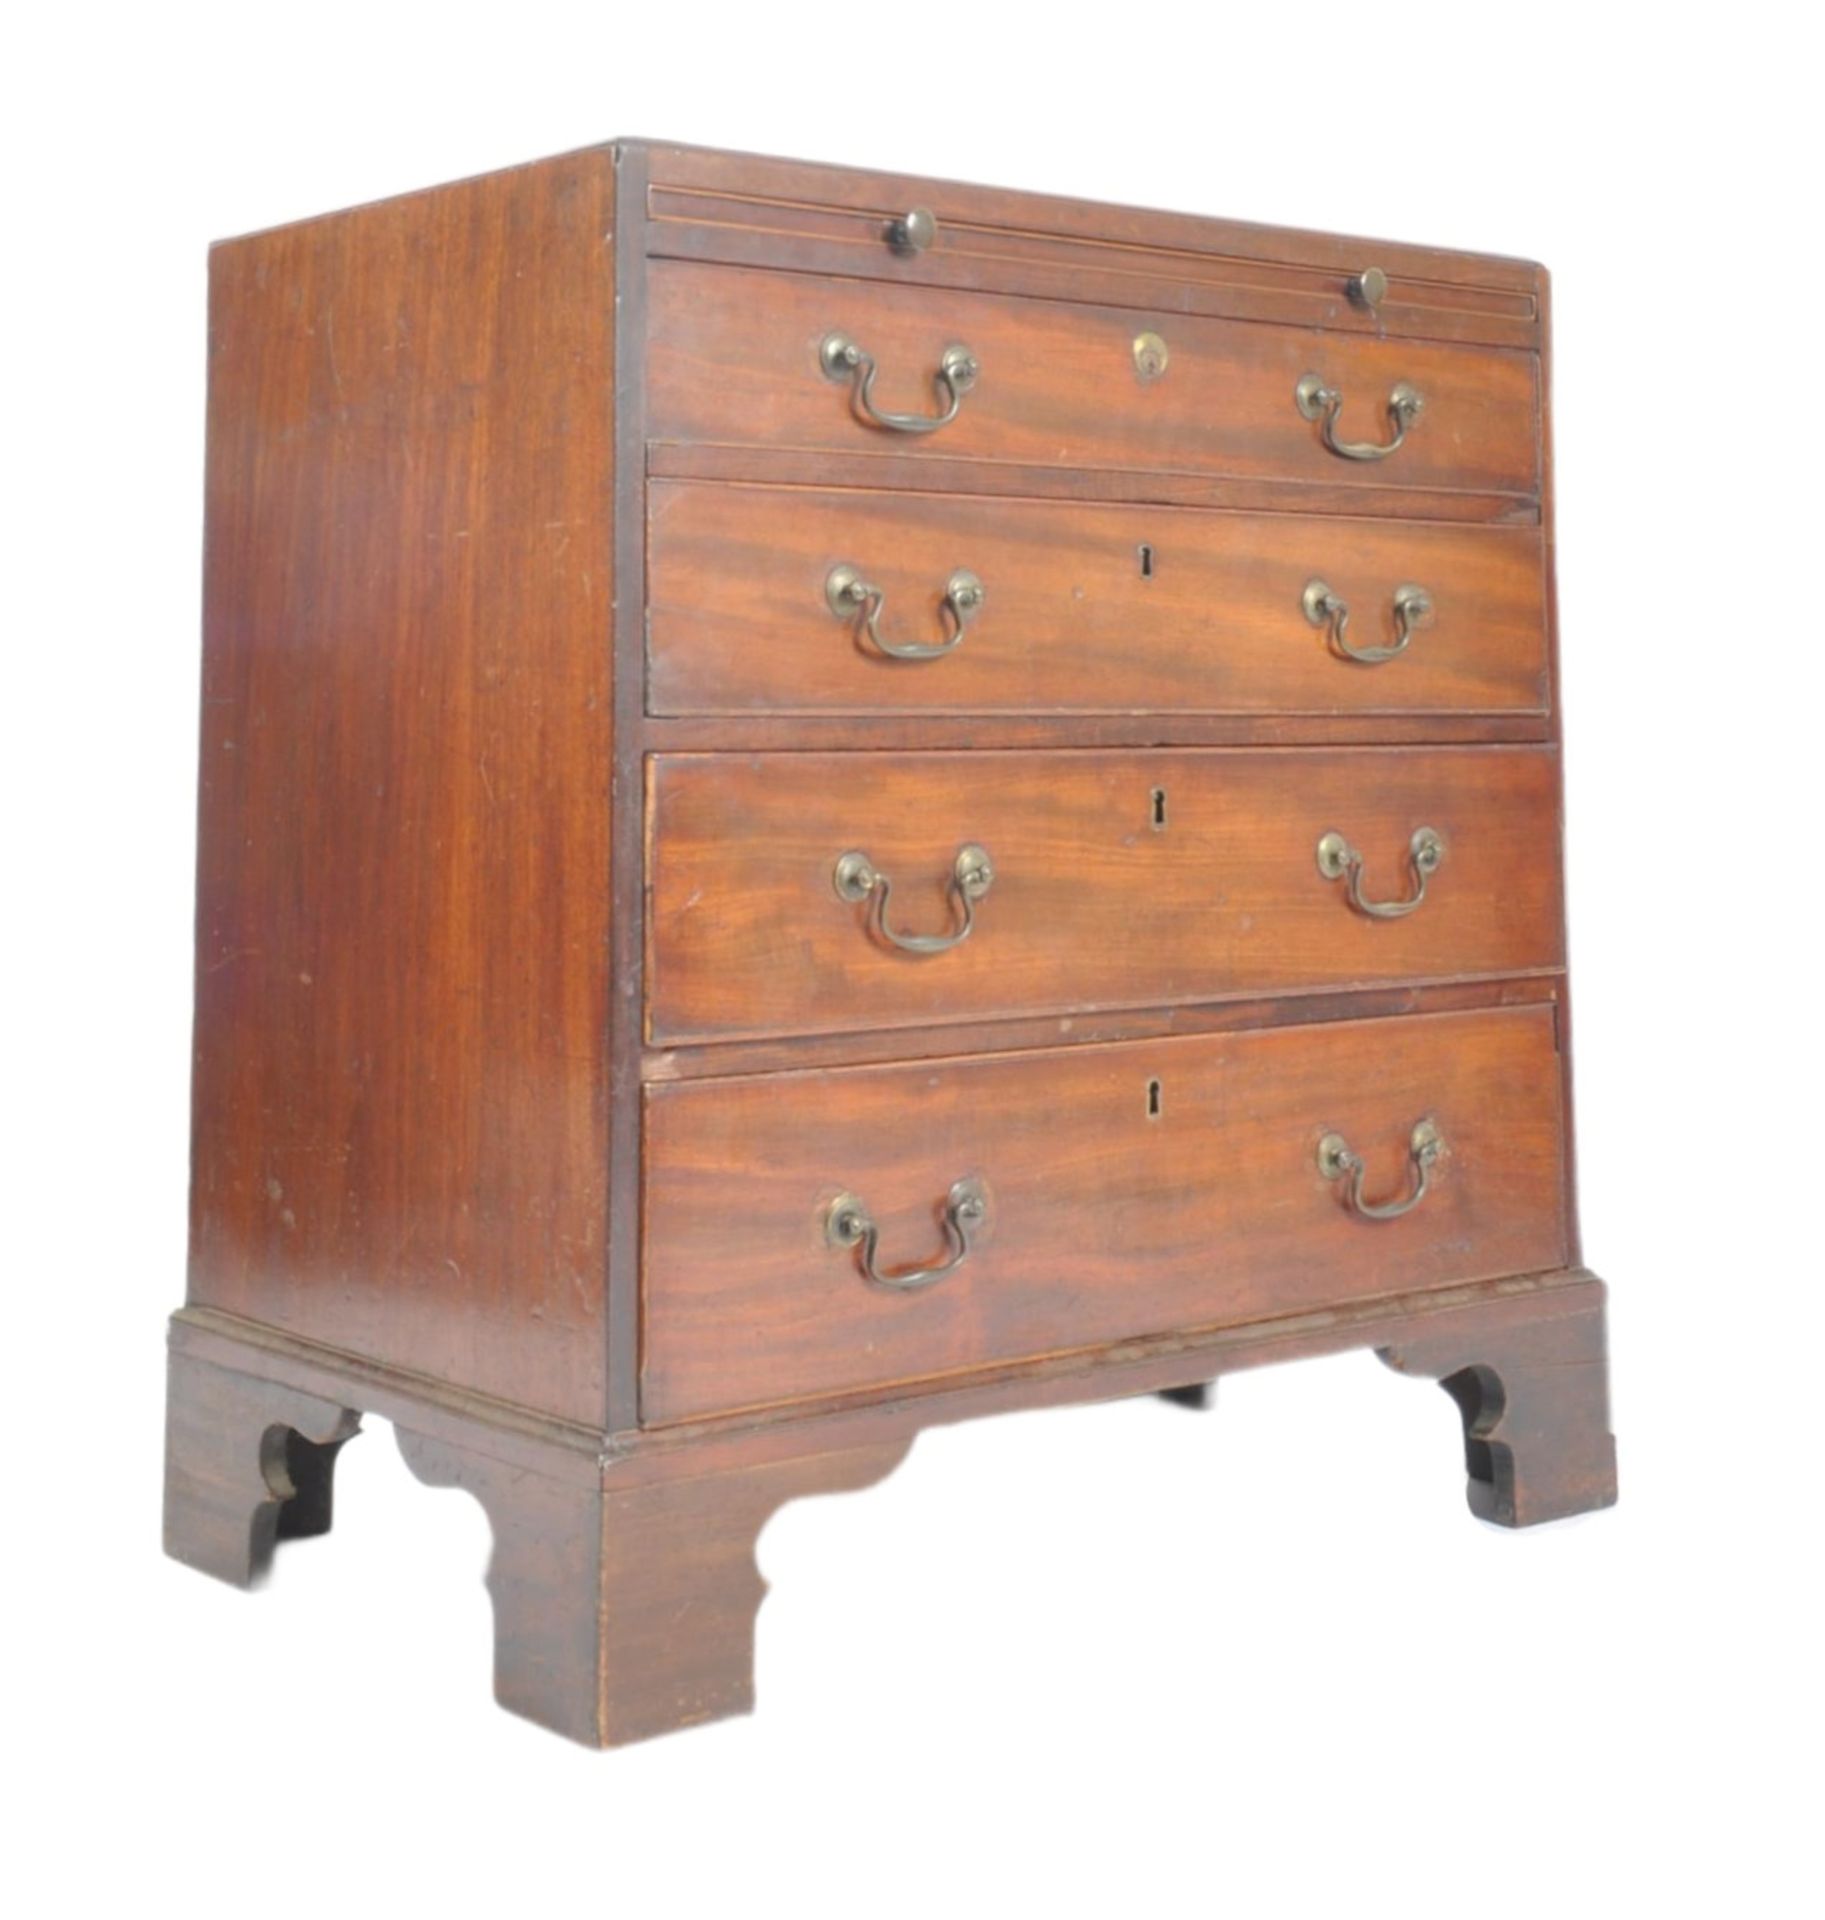 19TH CENTURY GEORGE III BACHELORS CHEST OF DRAWERS